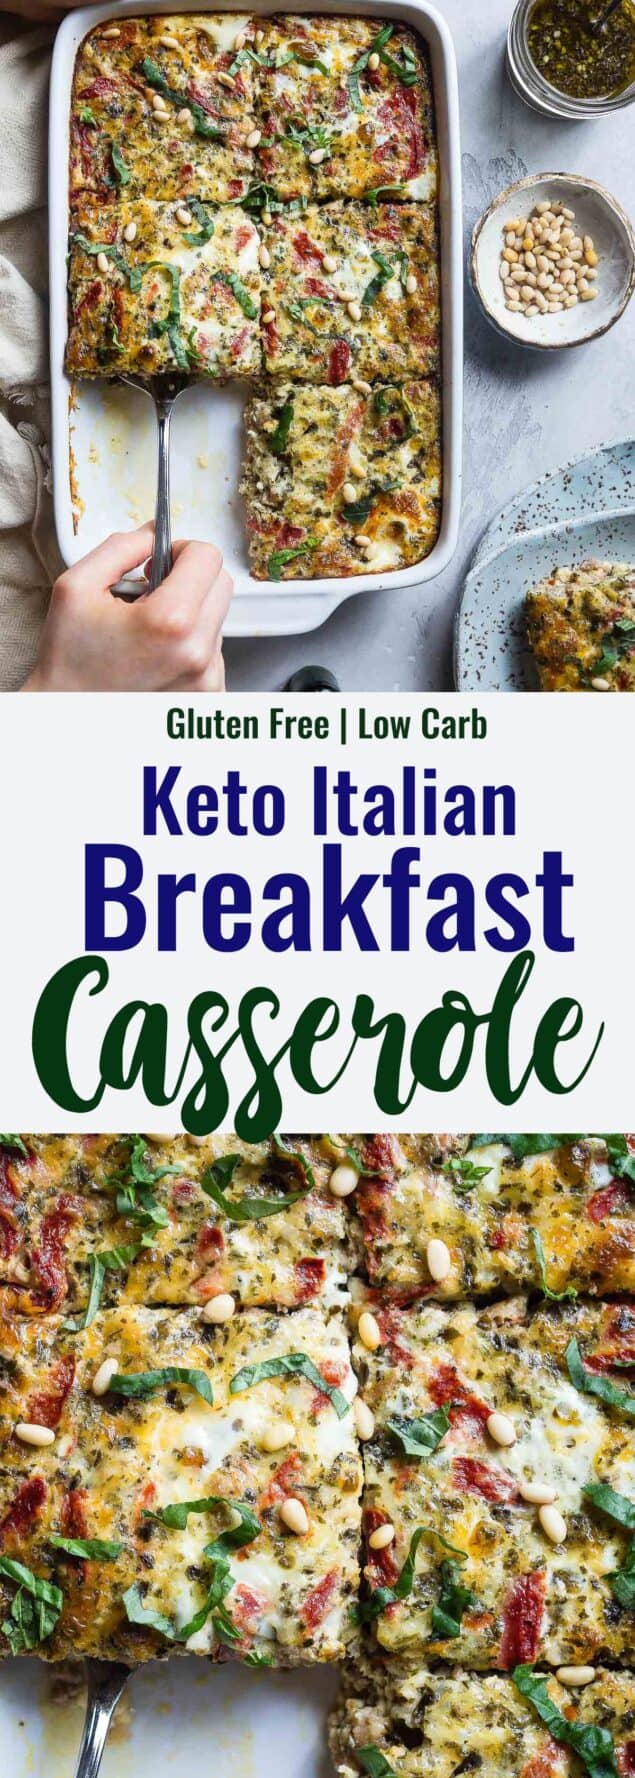 Easy Low Carb Keto Breakfast Casserole with Sausage